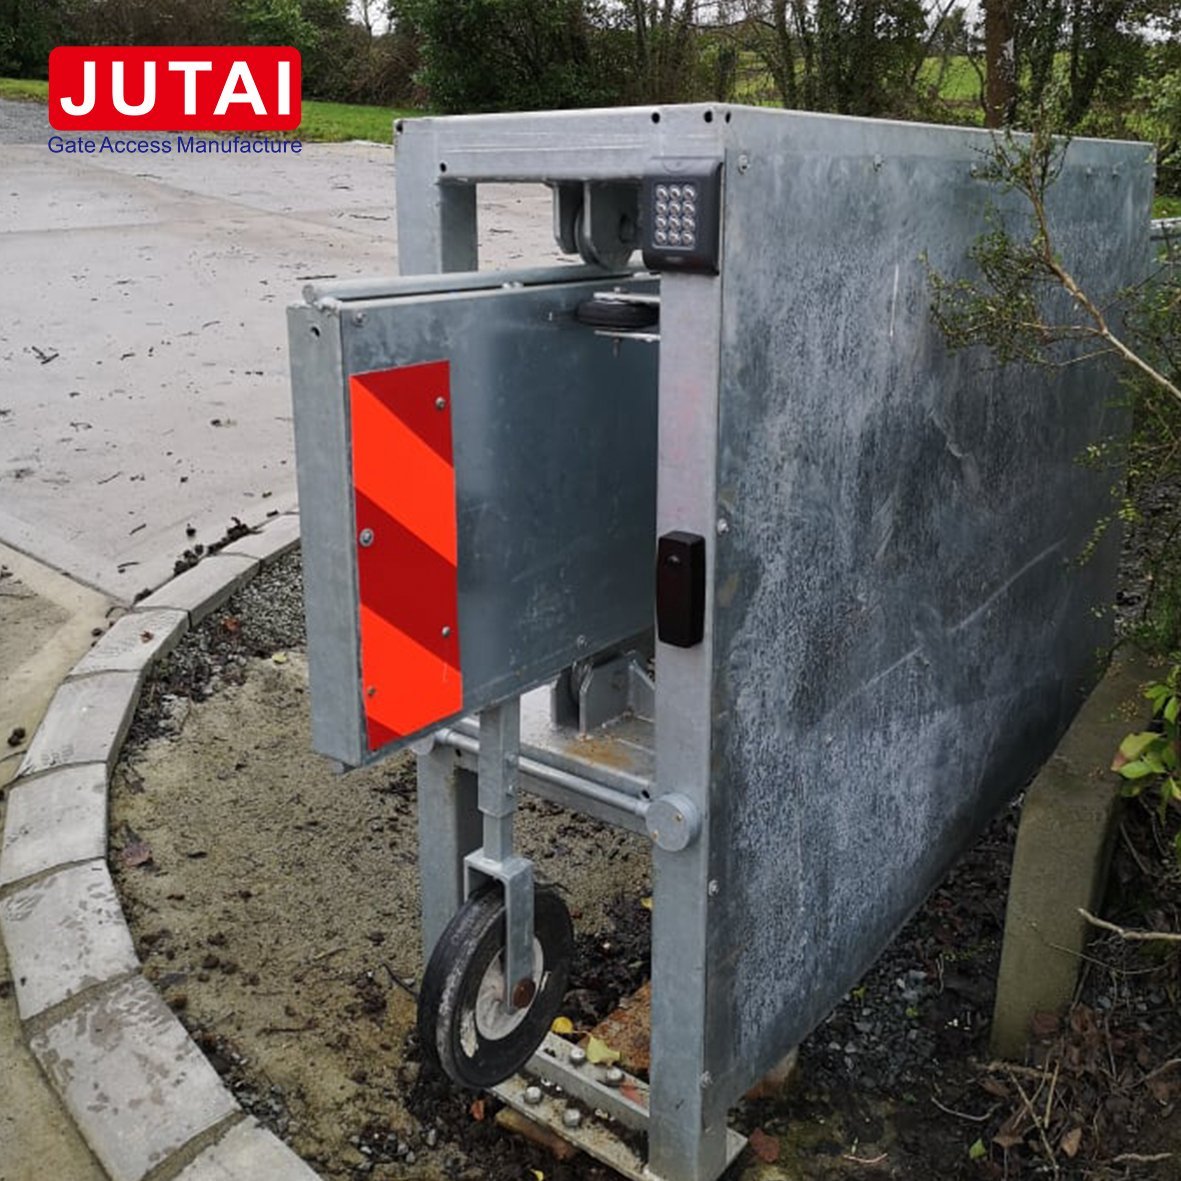 Infrared Photocell Beam Sensors For Automatic Gate Access System